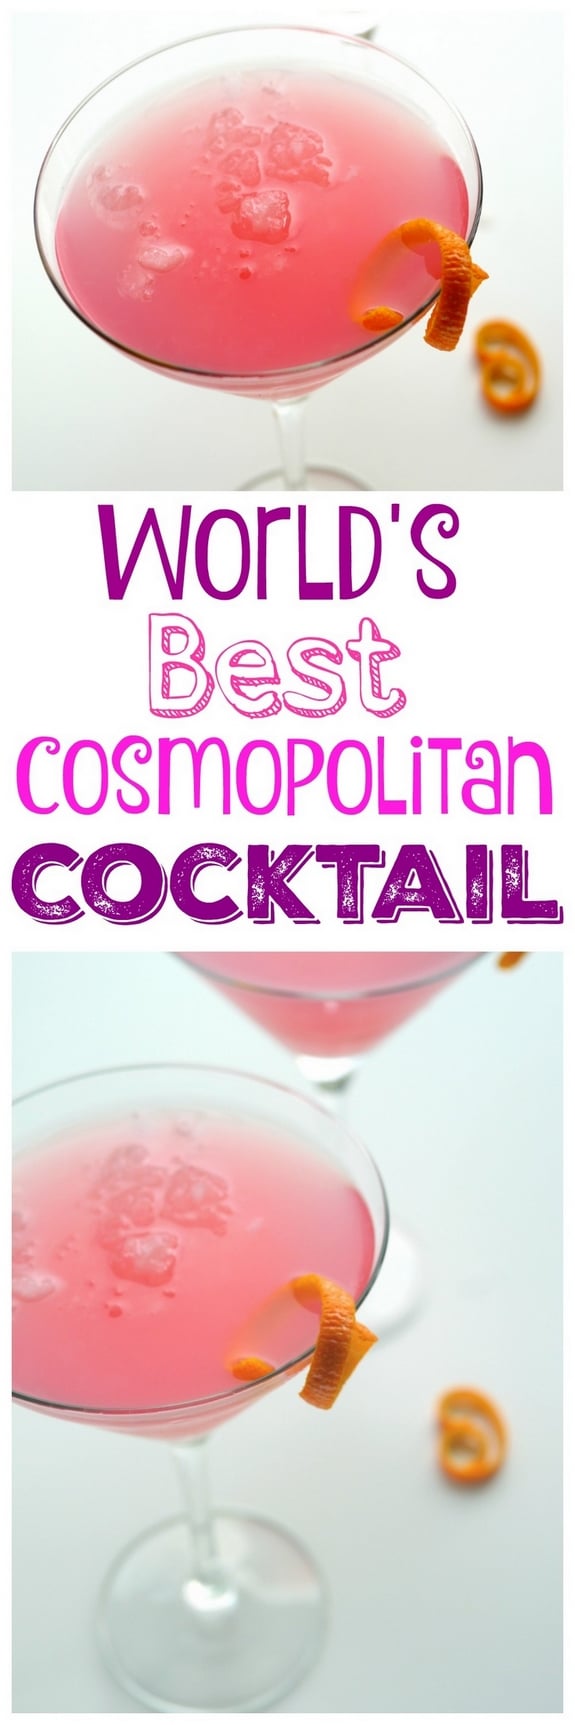 Two separate images of the World's Best Cosmopolitan Cocktail intersected with the words world's best cosmopolitan cocktail written between them.